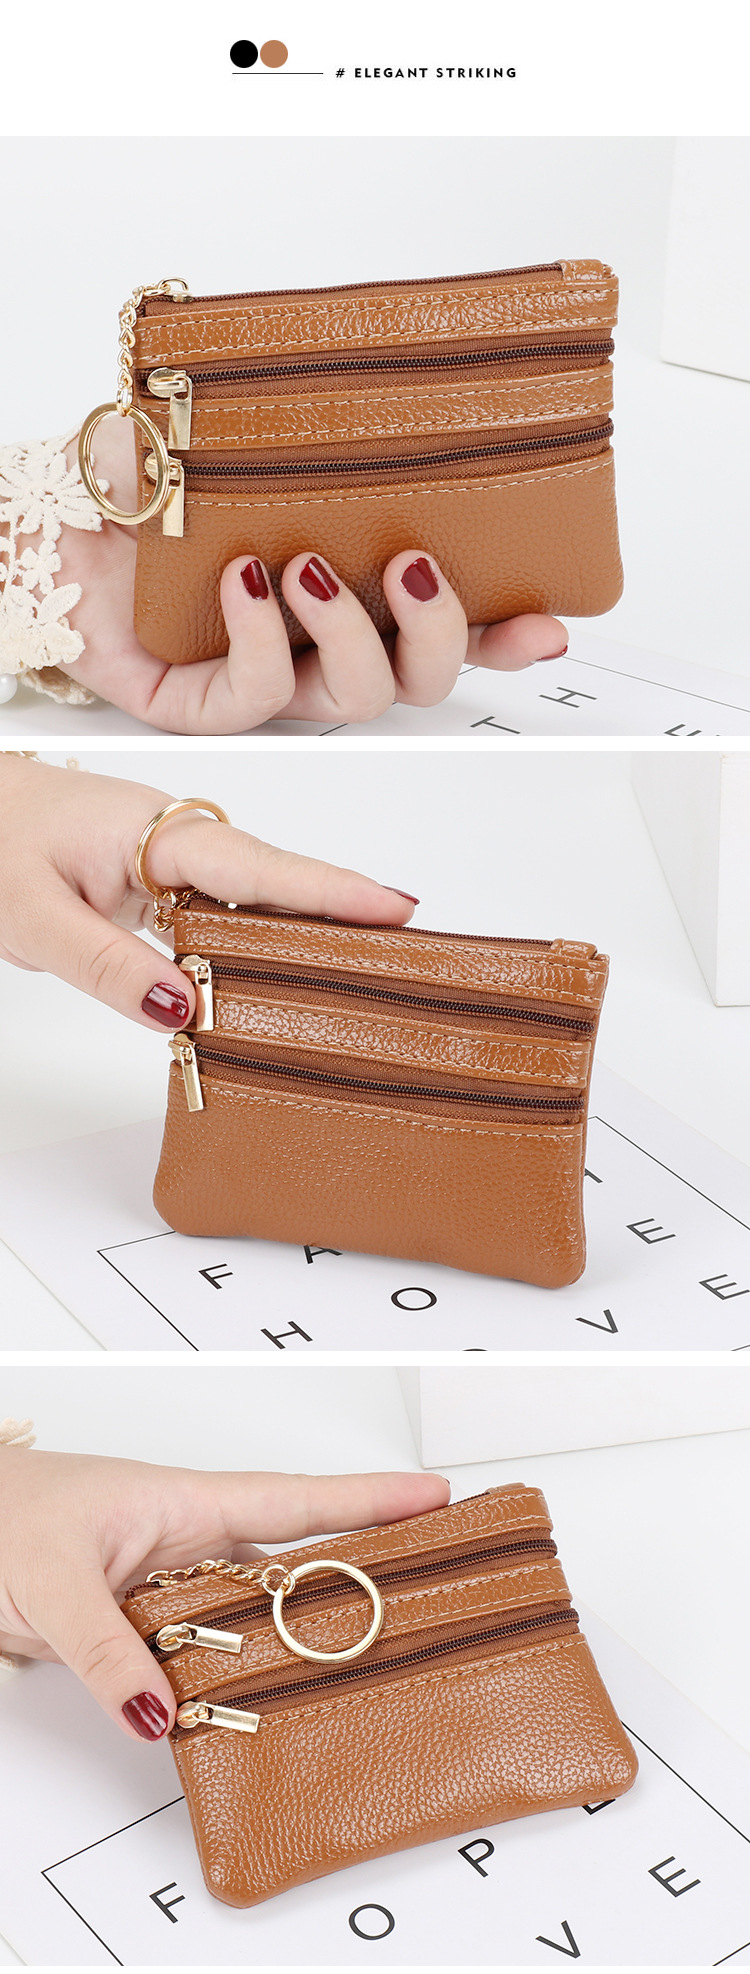 Summer Ladies Clutch Coin Purse Handmade Hand-woven Handbags Fashion Casual  Portable Elegant Simple Exquisite for Shopping